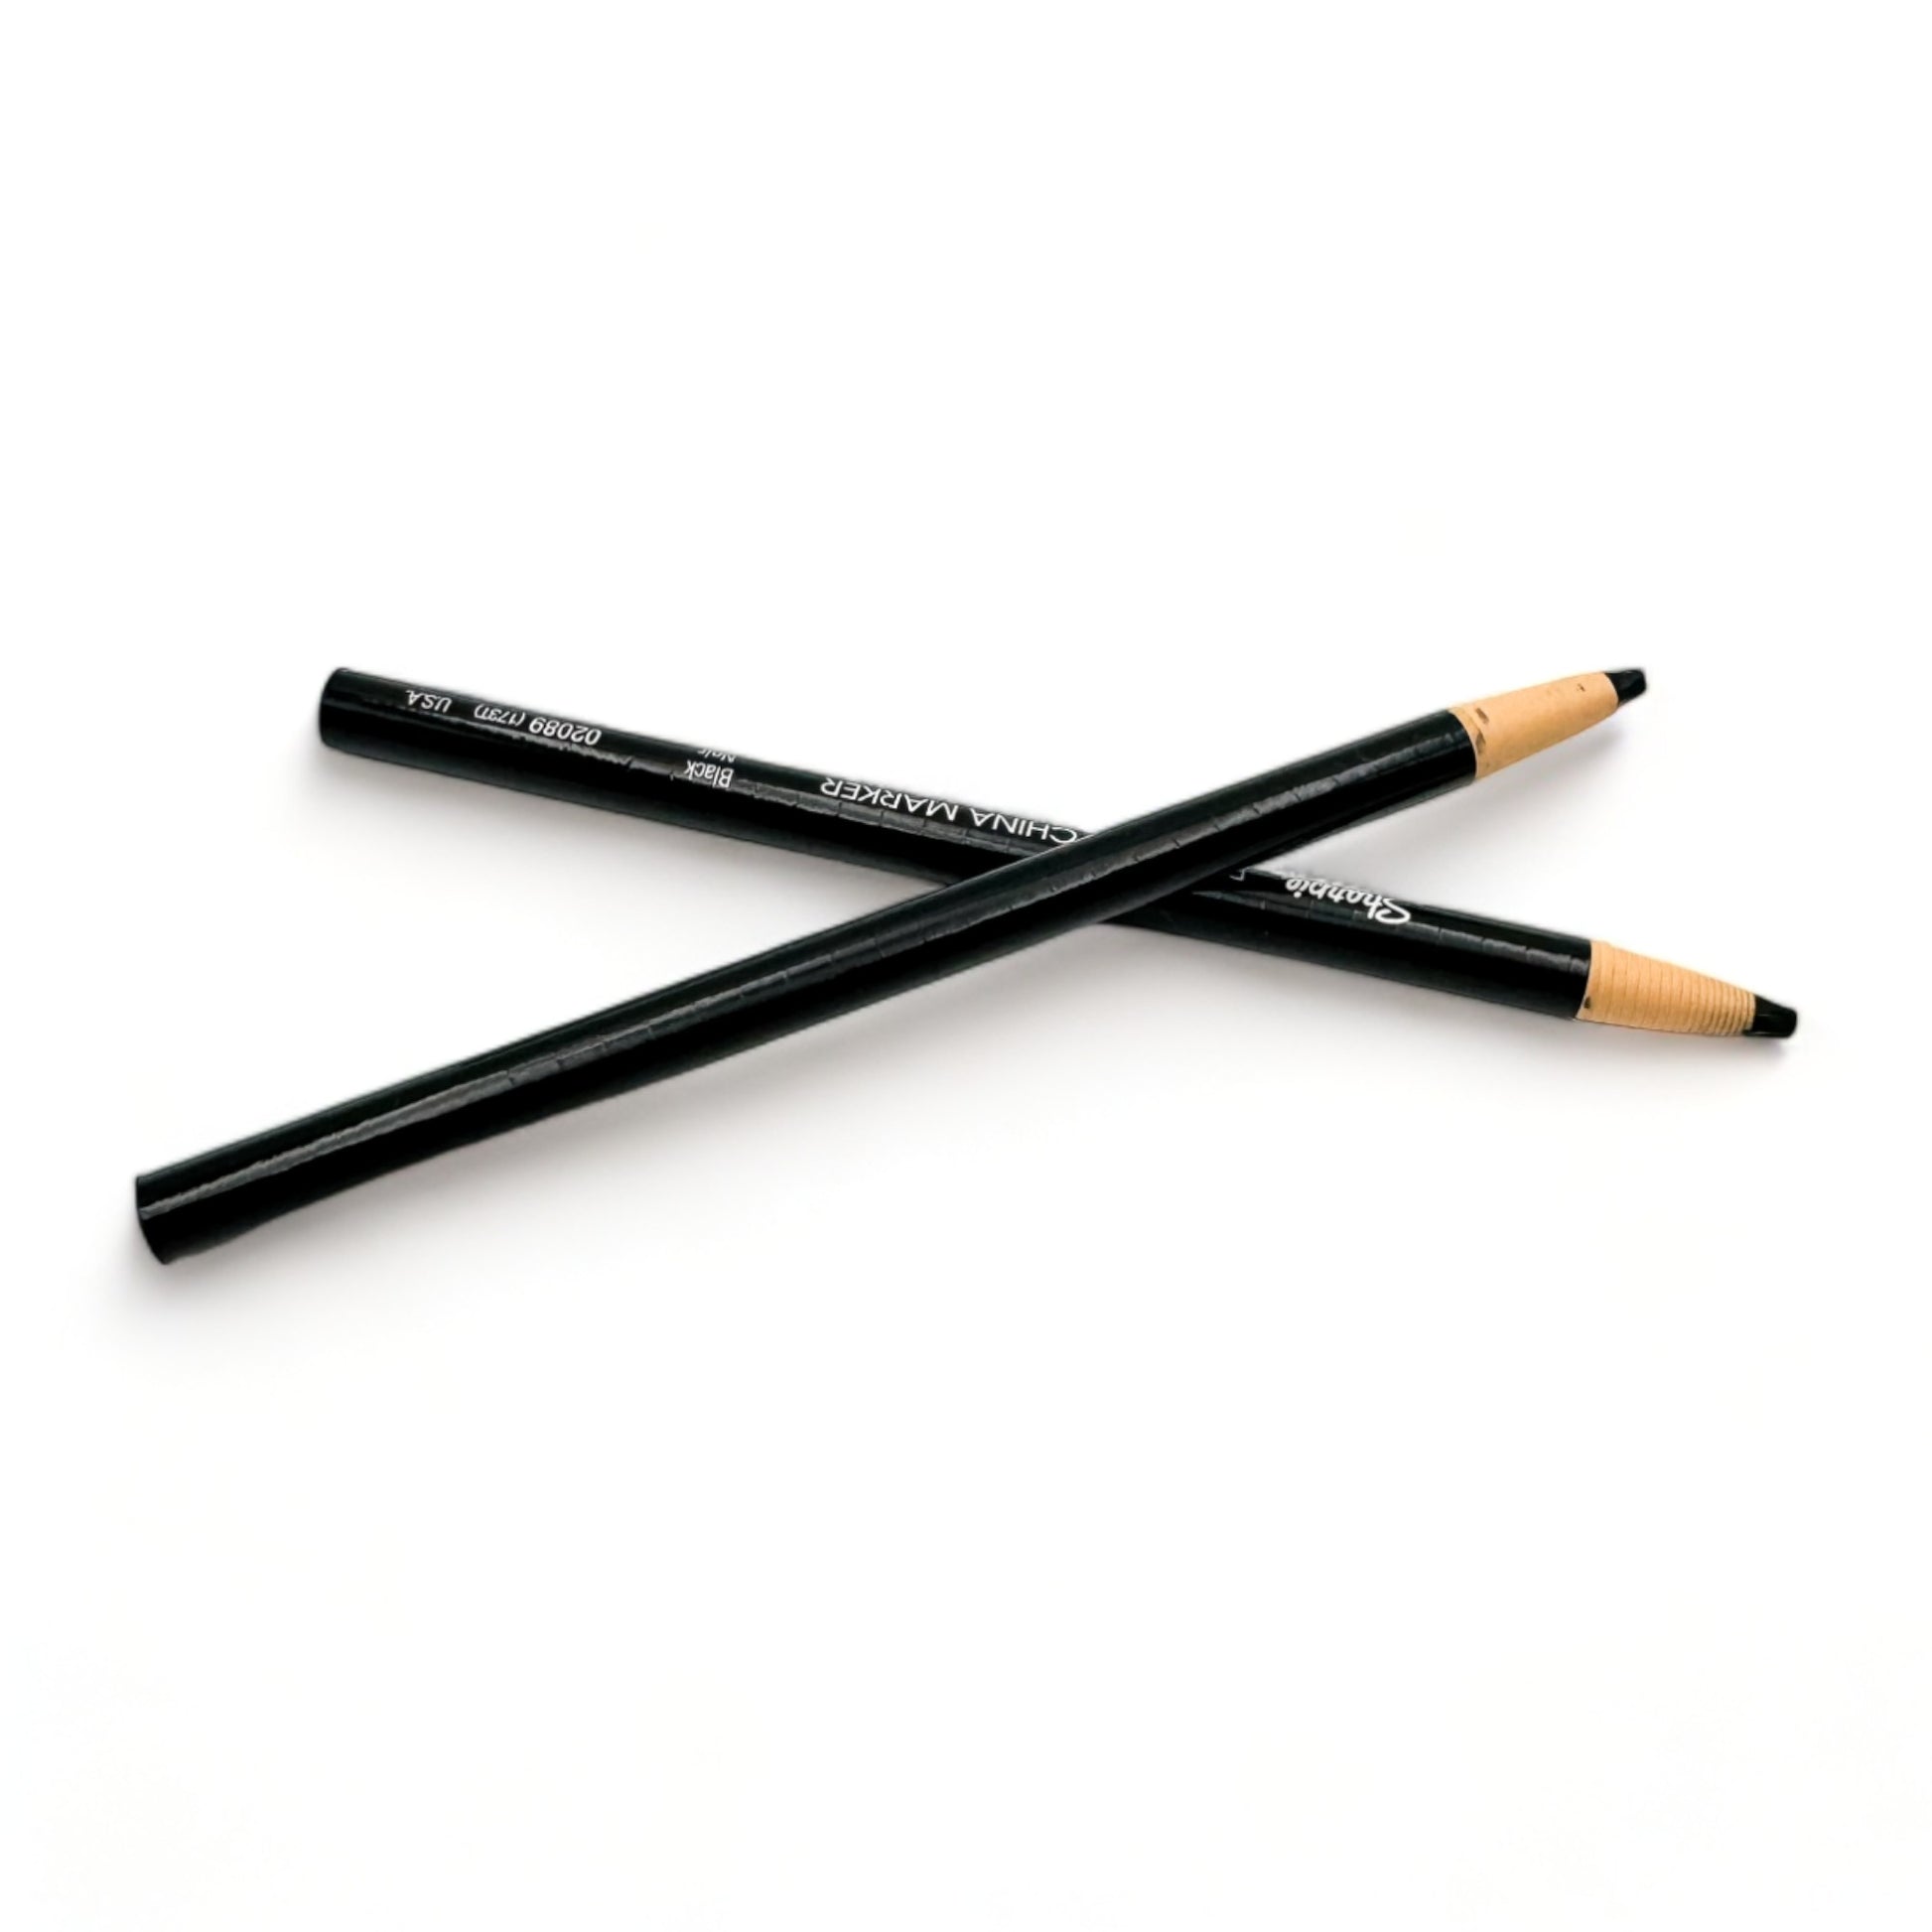 A pair of oil pencils for documenting presented on a clean white surface